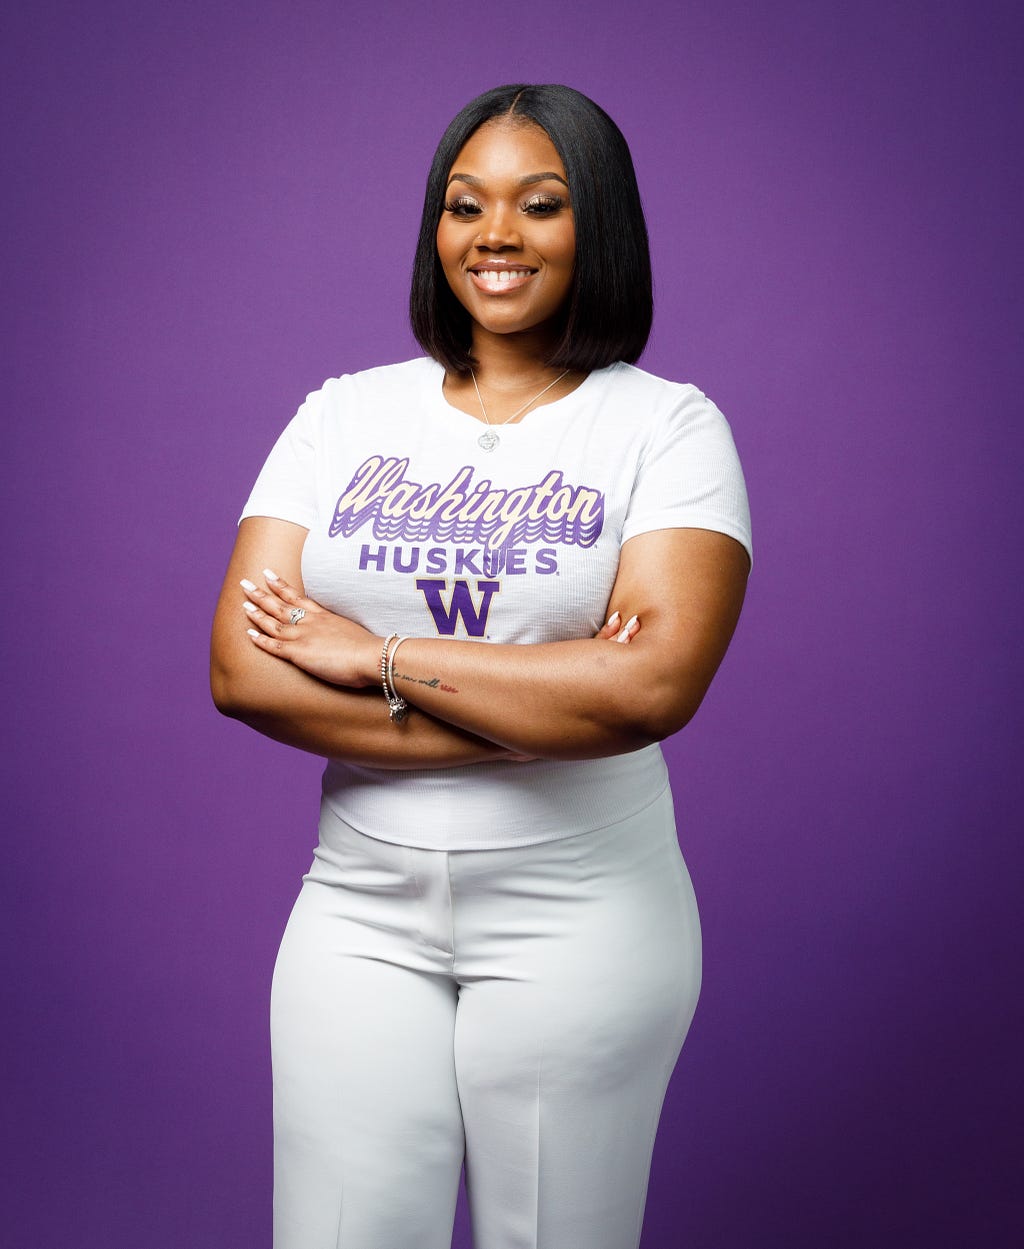 Dr. DD pictured with “Washington Huskies” shirt